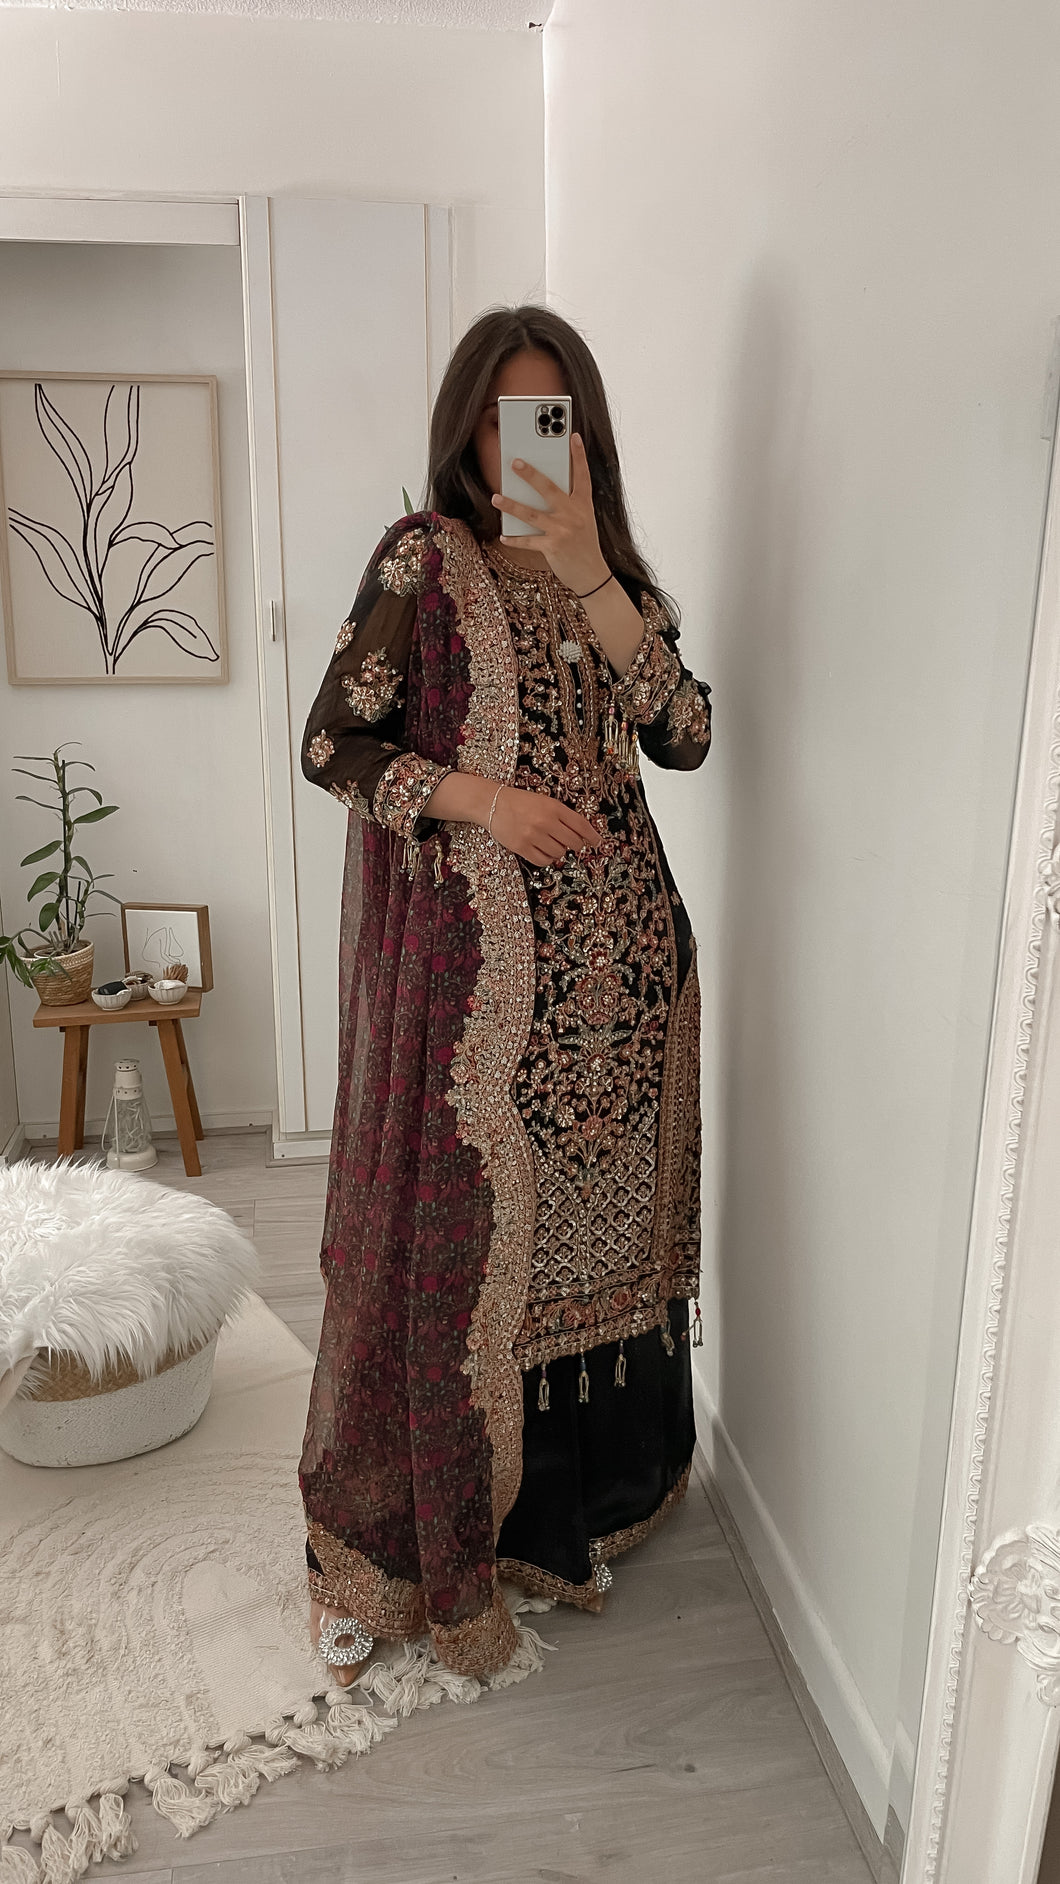 Hussain Rehar Inspired -3-6 weeks delivery